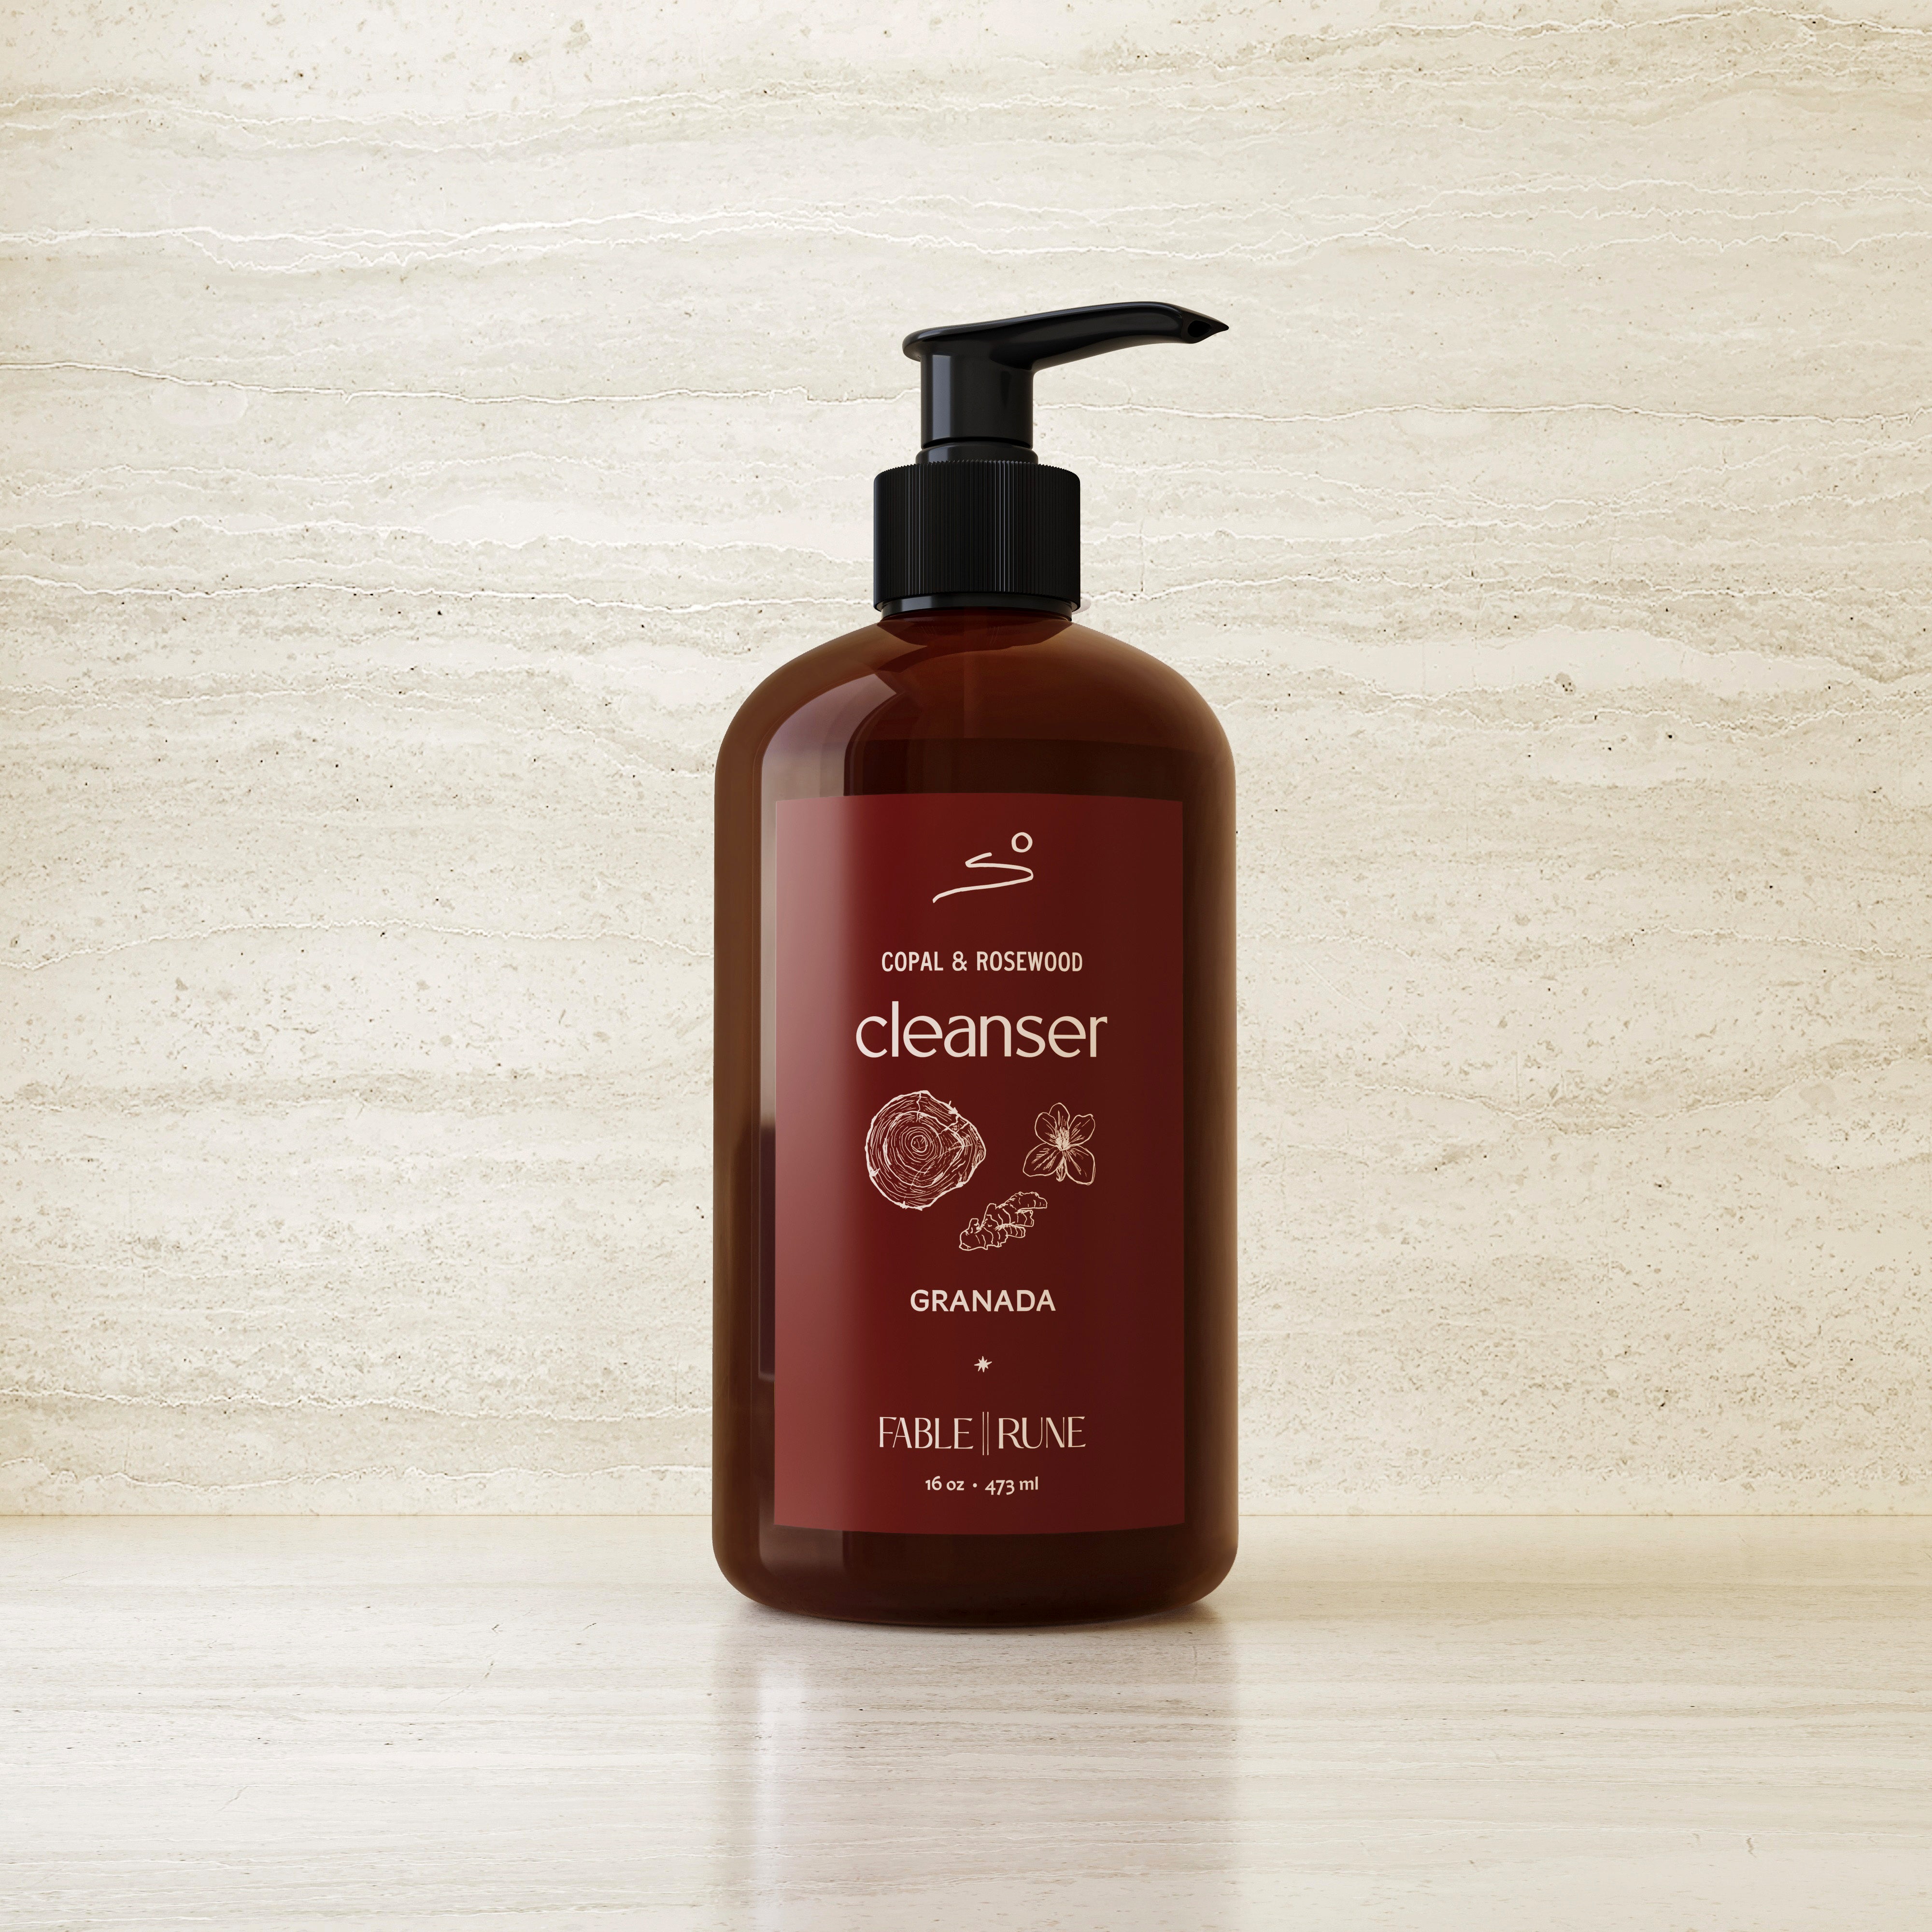 Copal & Rosewood Cleanser Fable Rune for Granada by Nomada Deco